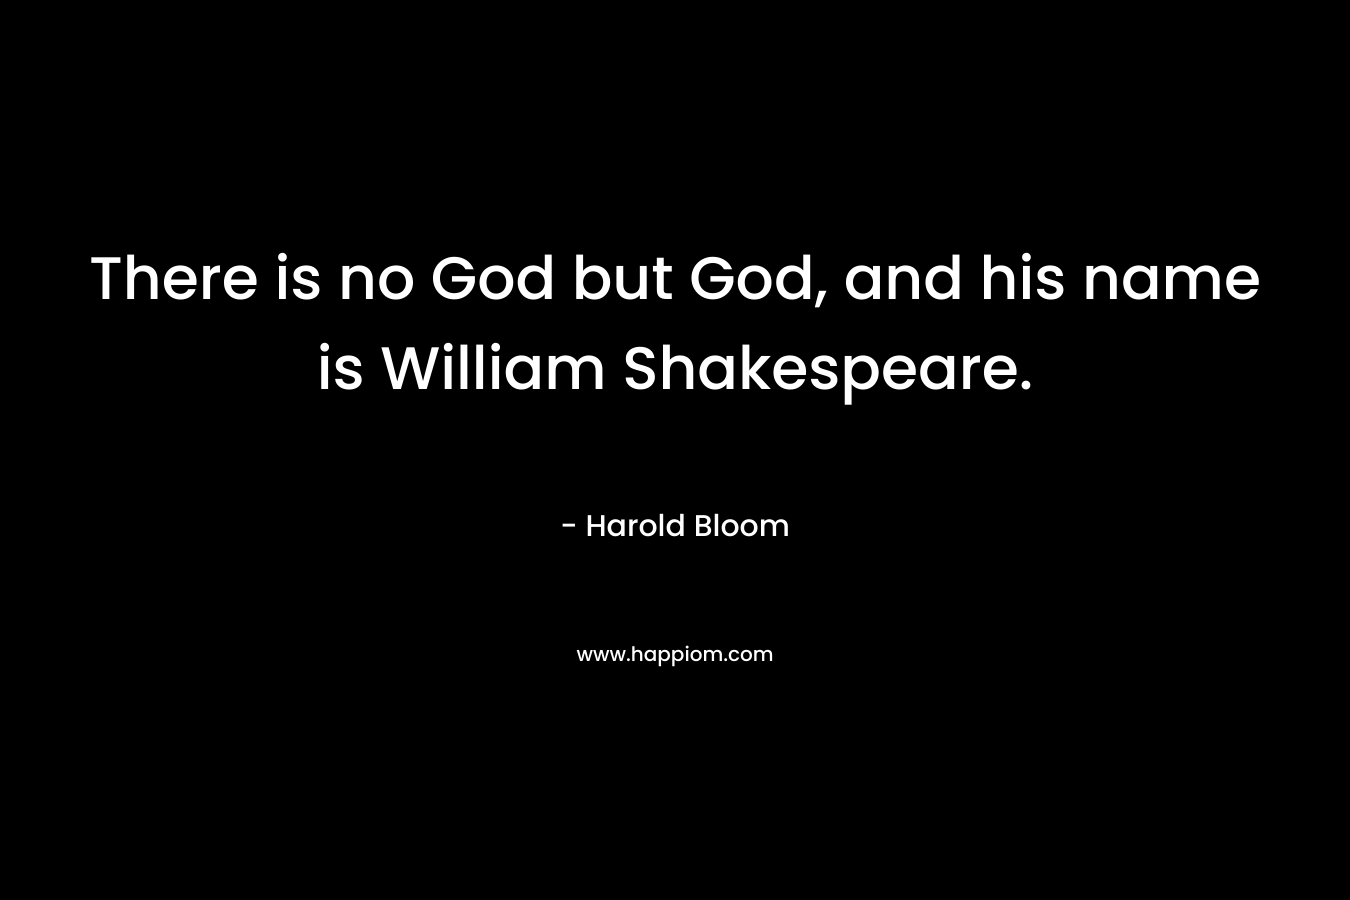 There is no God but God, and his name is William Shakespeare. – Harold Bloom